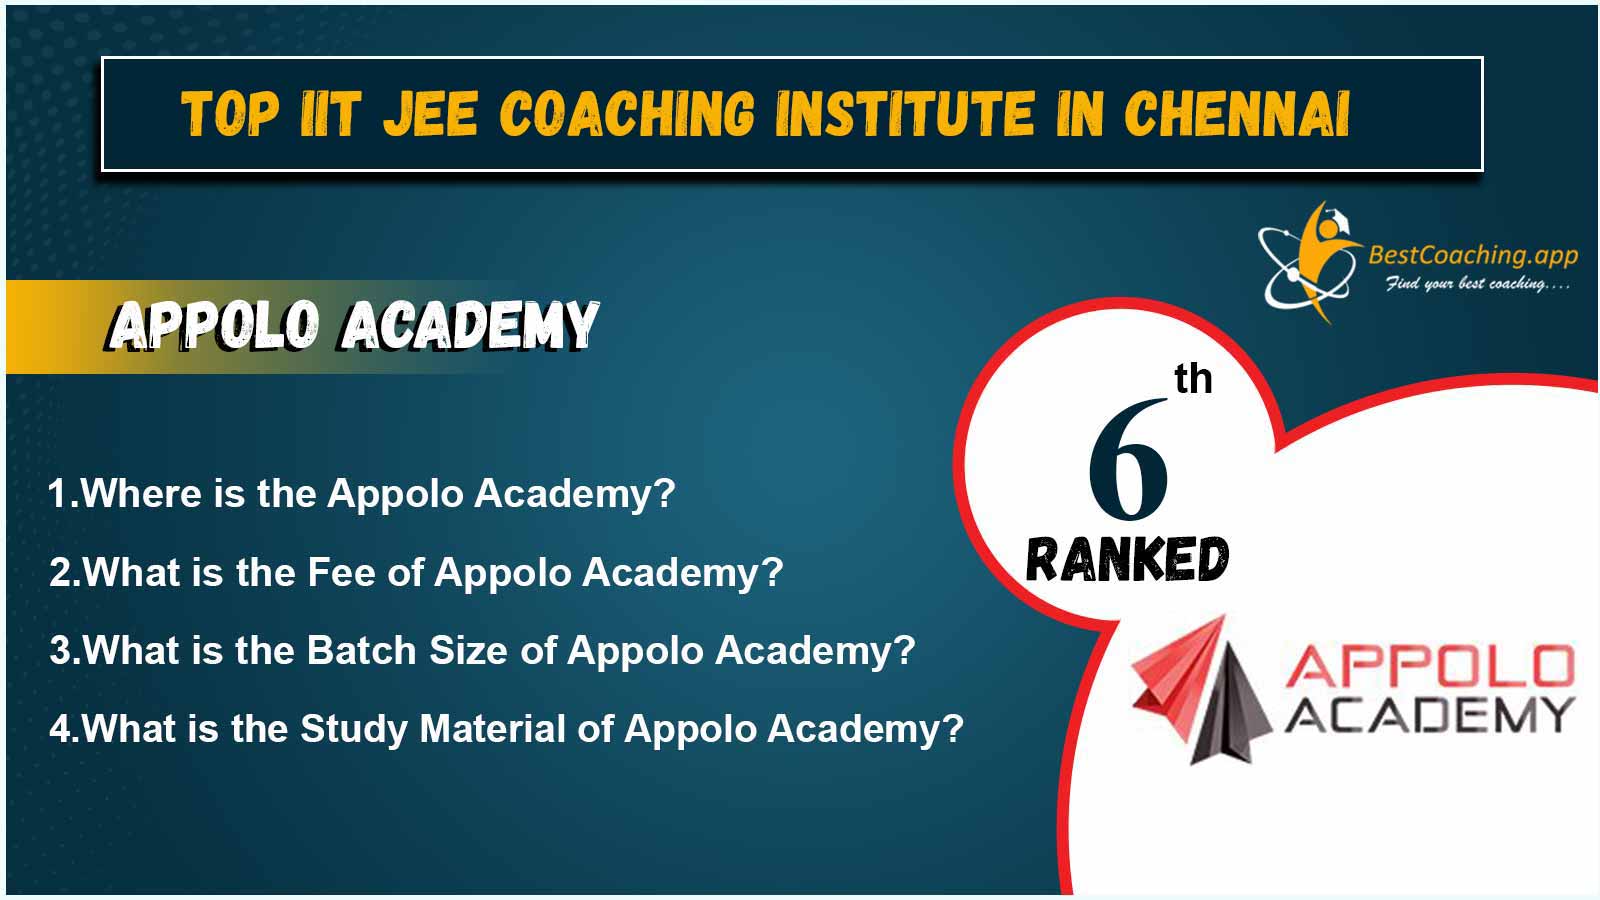 Top IIT JEE Coaching Centers In Chennai